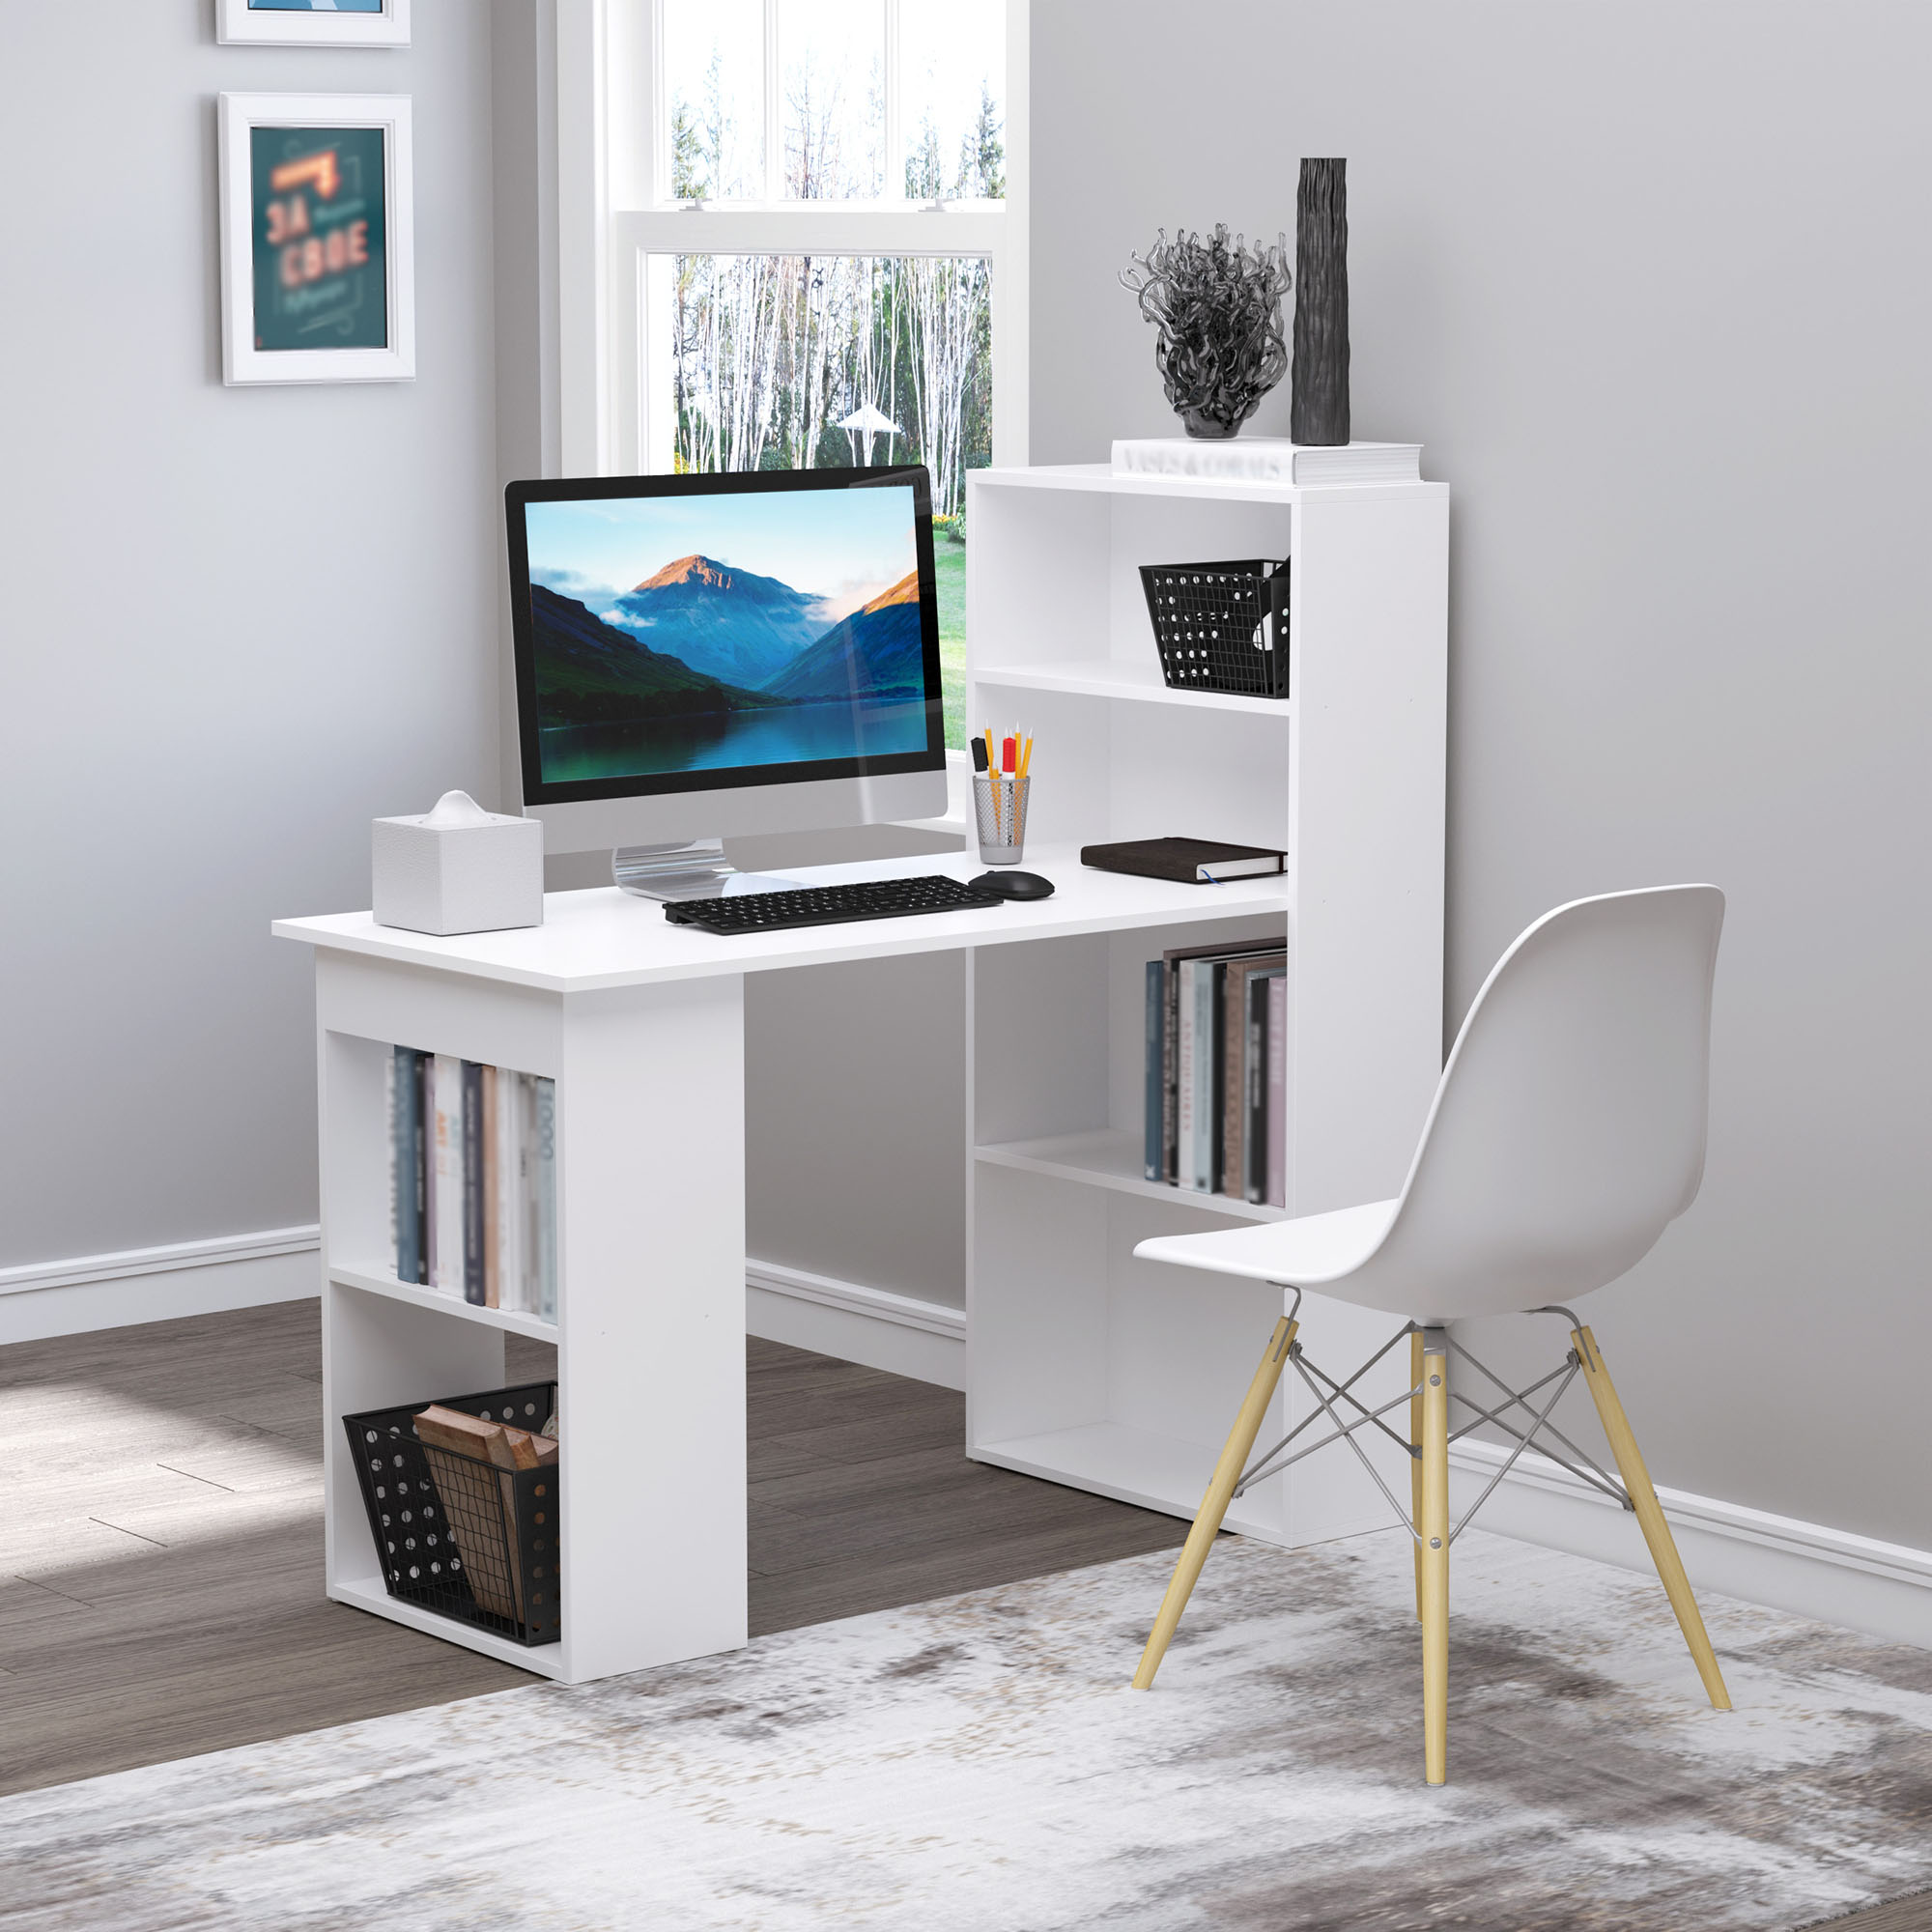 HOMCOM Modern Home Office Desk with 6-Tier Storage Shelves, 47" Writing Table with Bookshelf, White - image 2 of 9